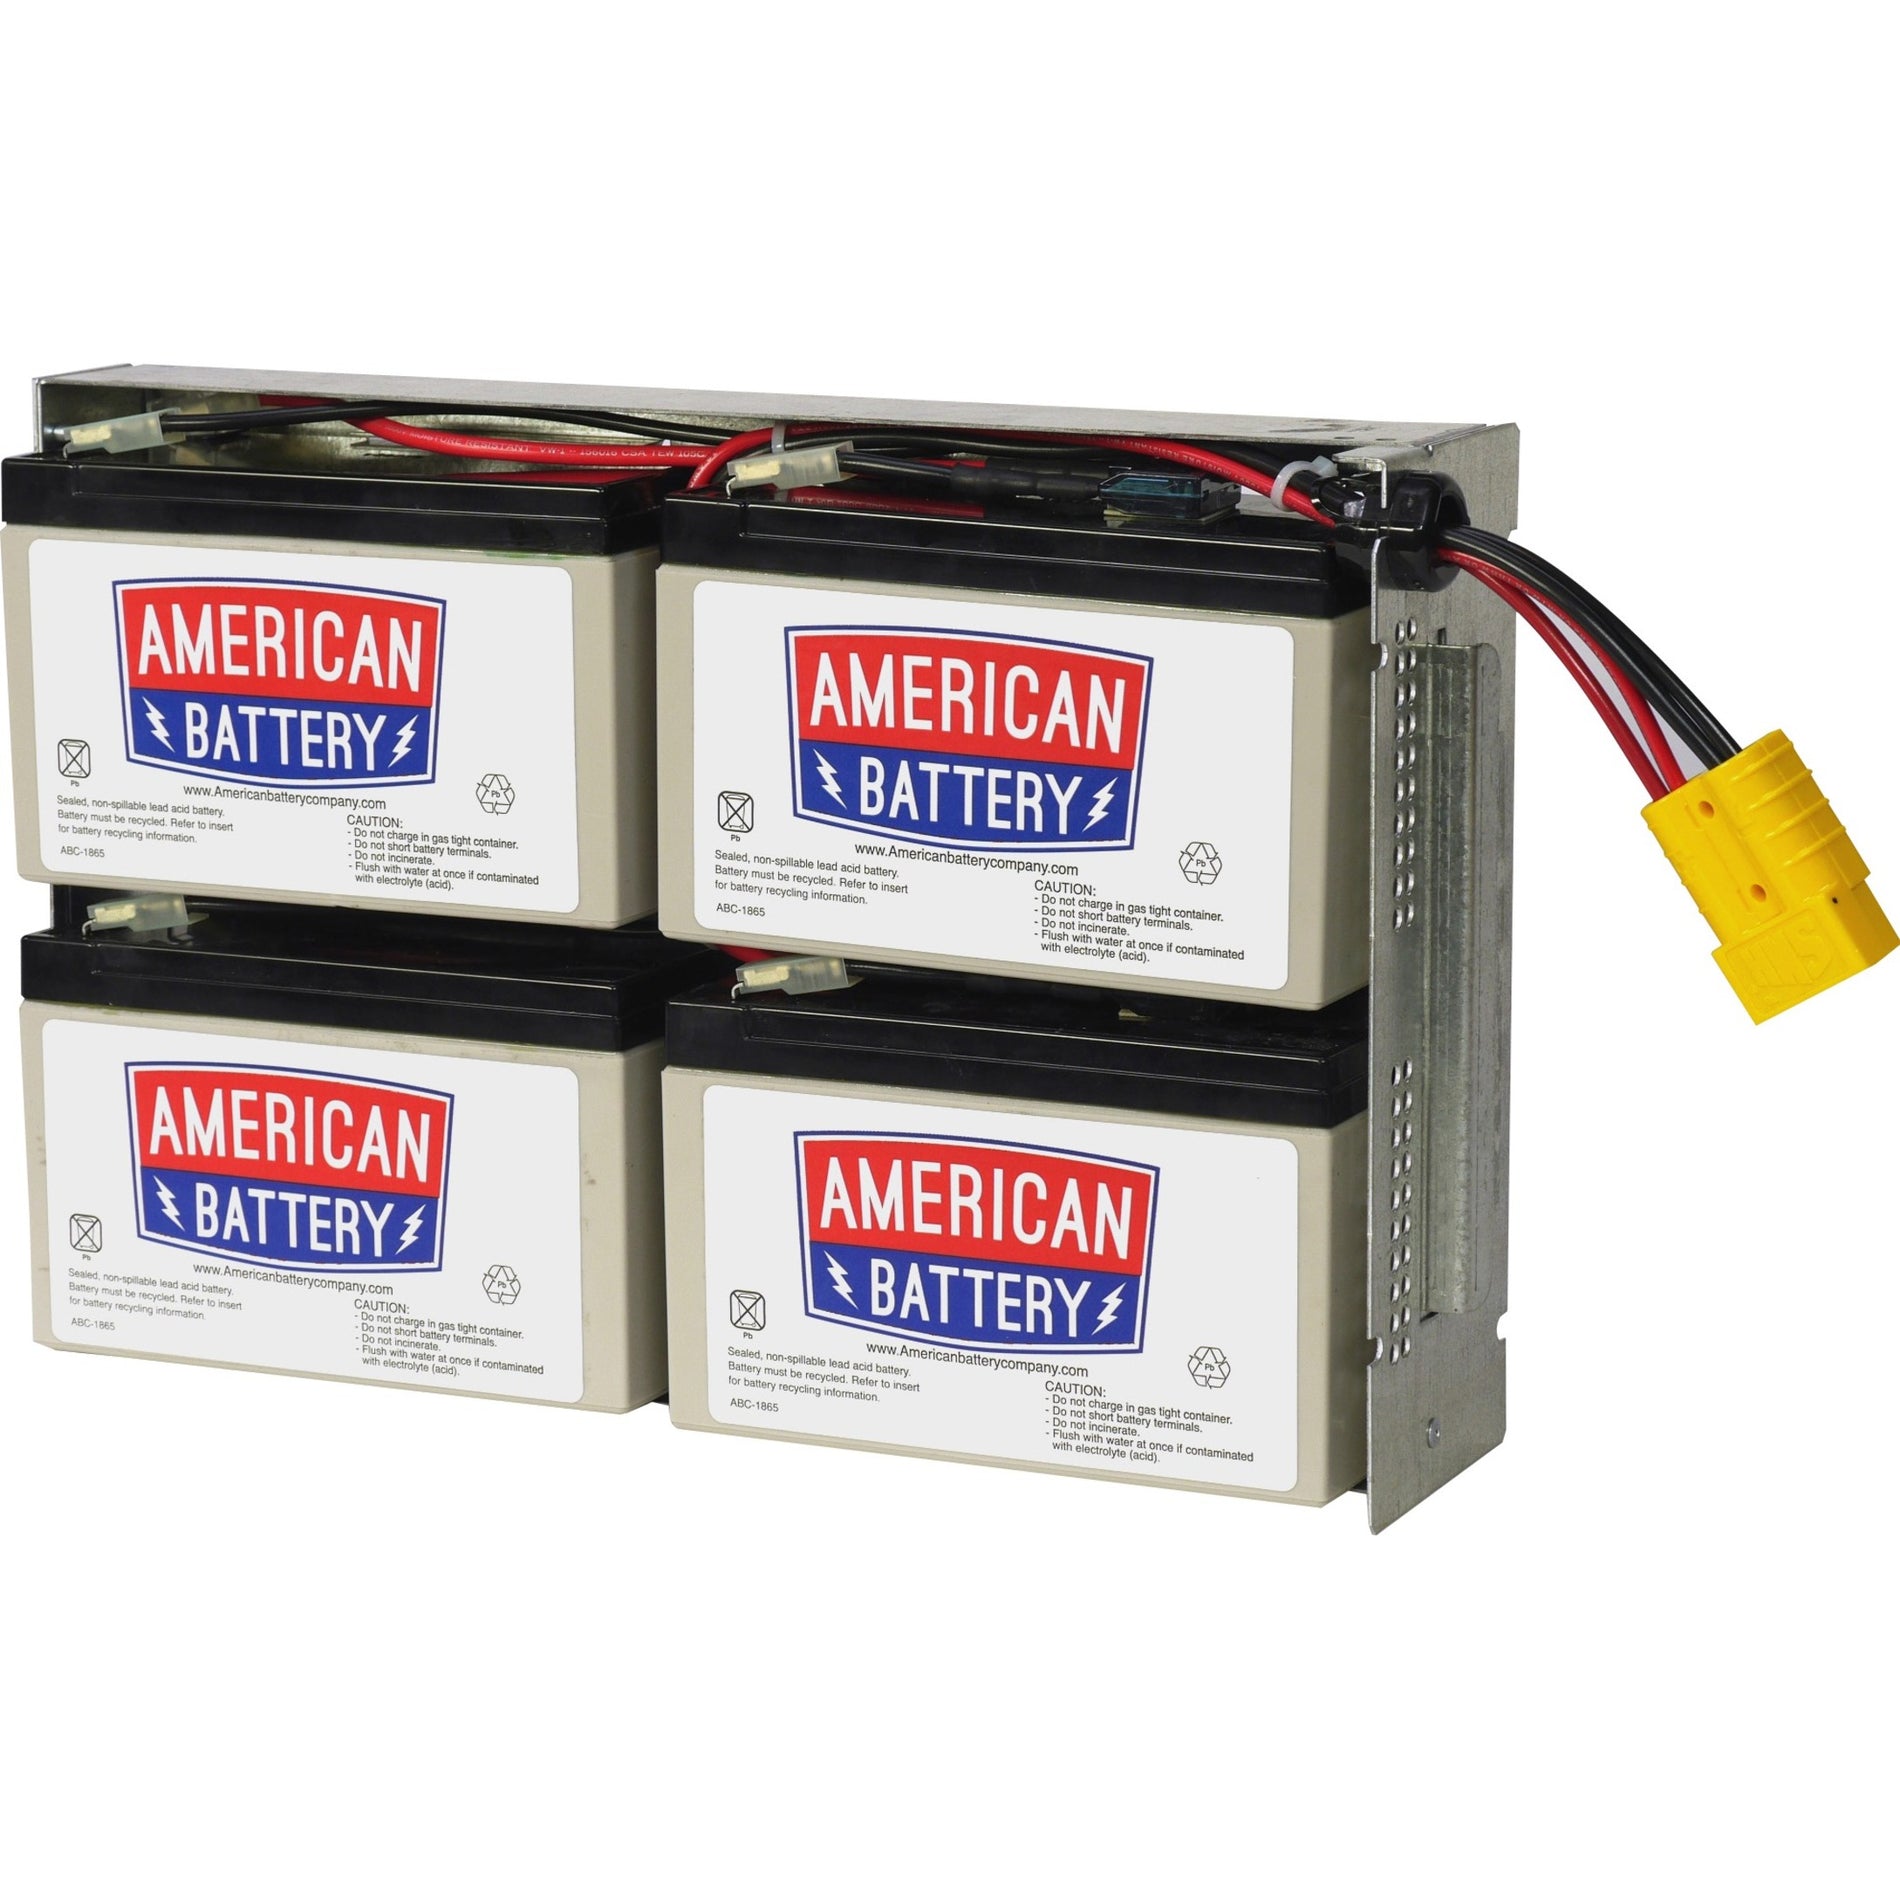 ABC RBC23 Replacement Battery Cartridge #23, 2 Year Warranty, Hot Swappable, 48 VAh, 12V DC, Lead Acid